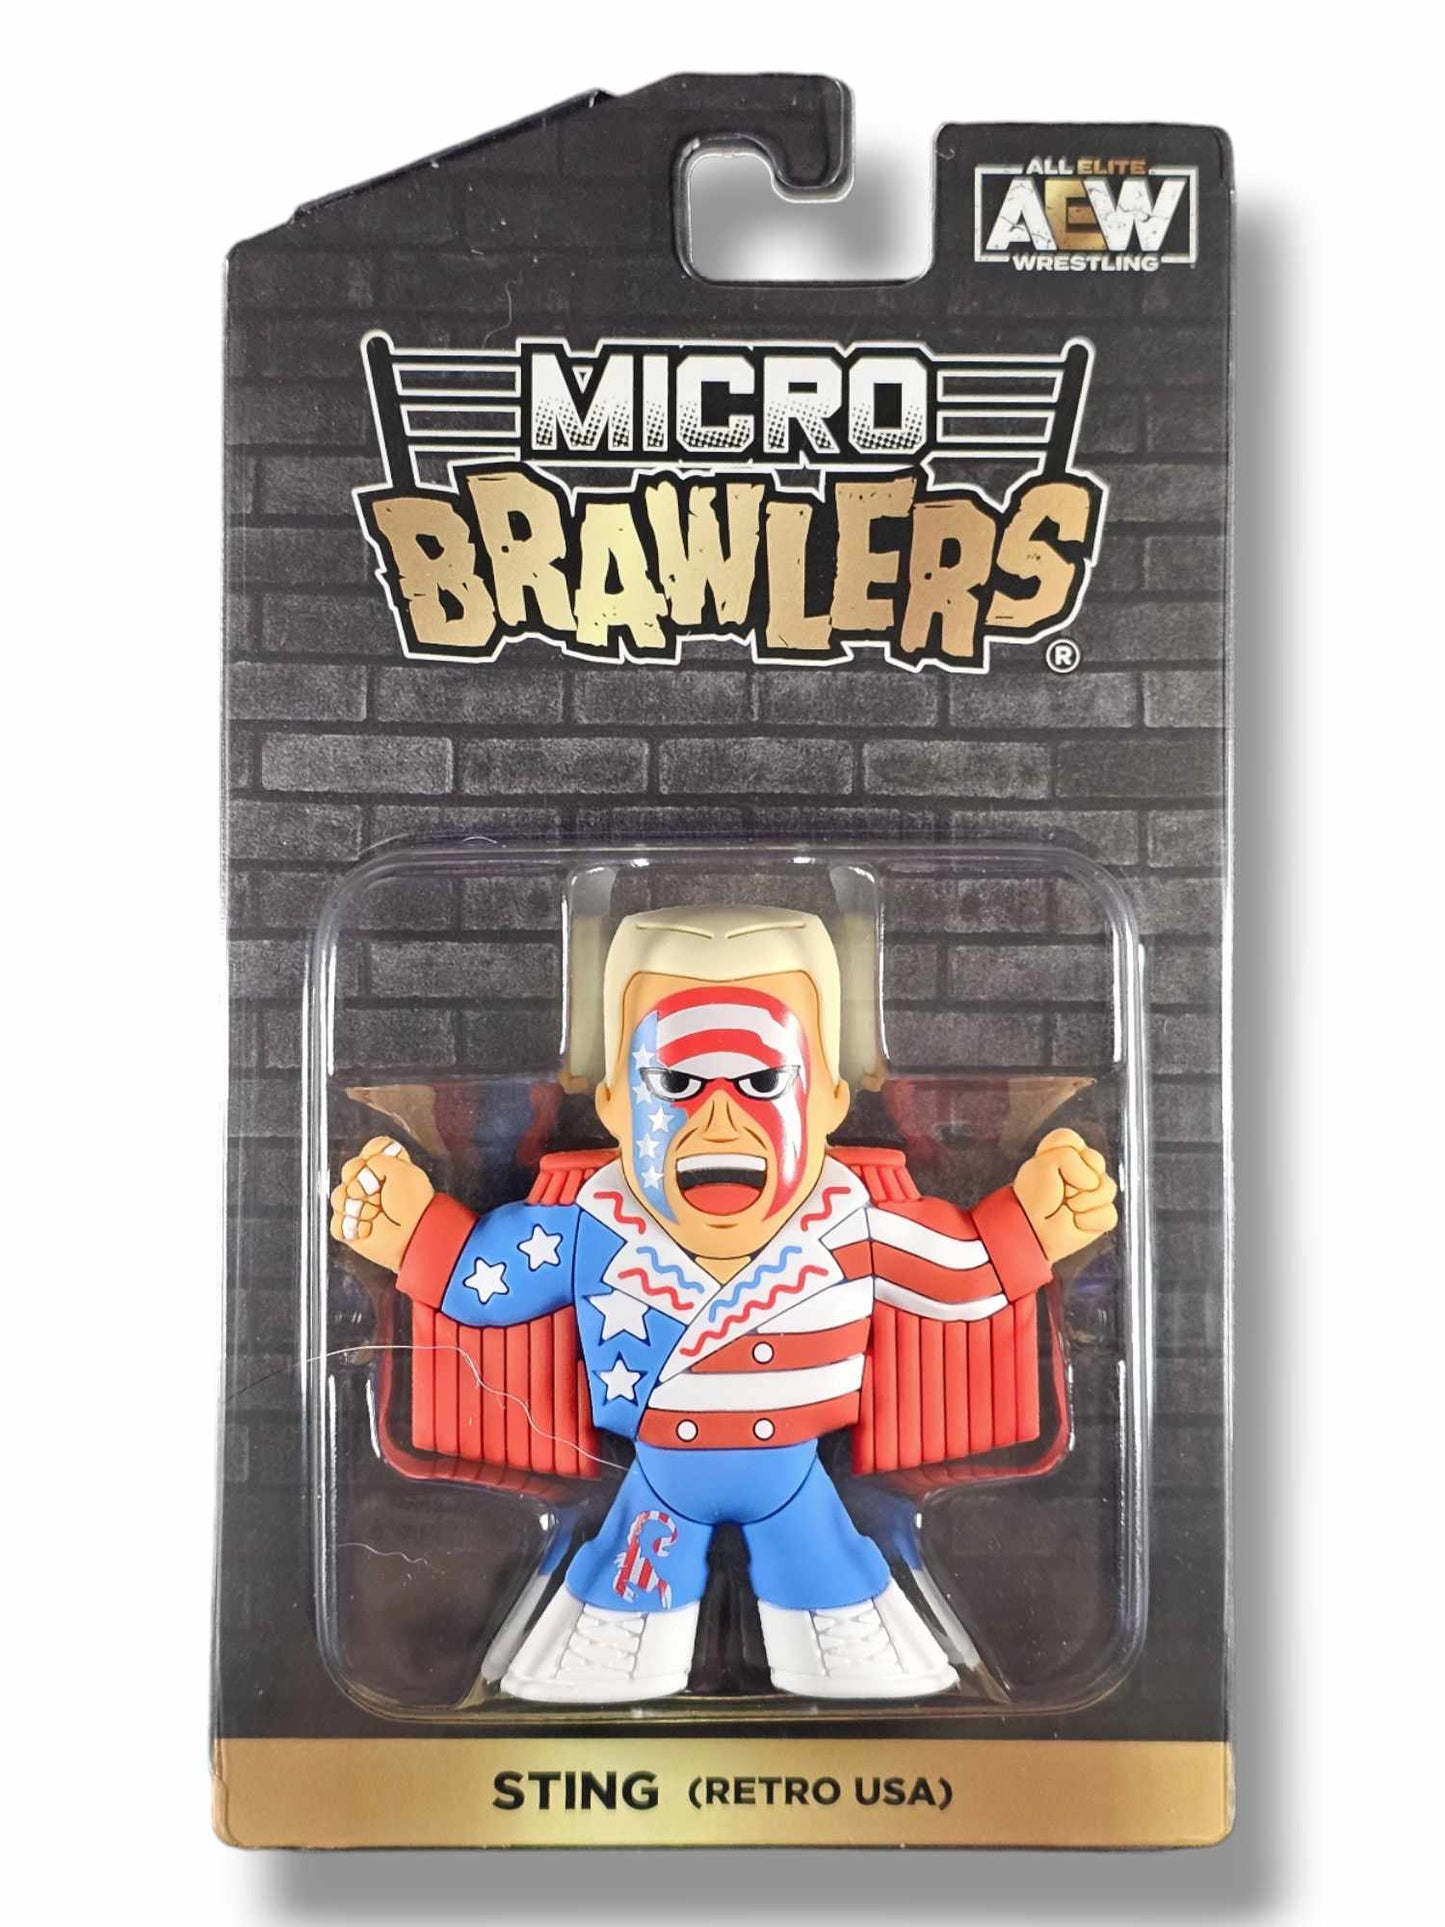 2023 AEW Pro Wrestling Tees Micro Brawlers Limited Edition Sting [Retr –  Wrestling Figure Database